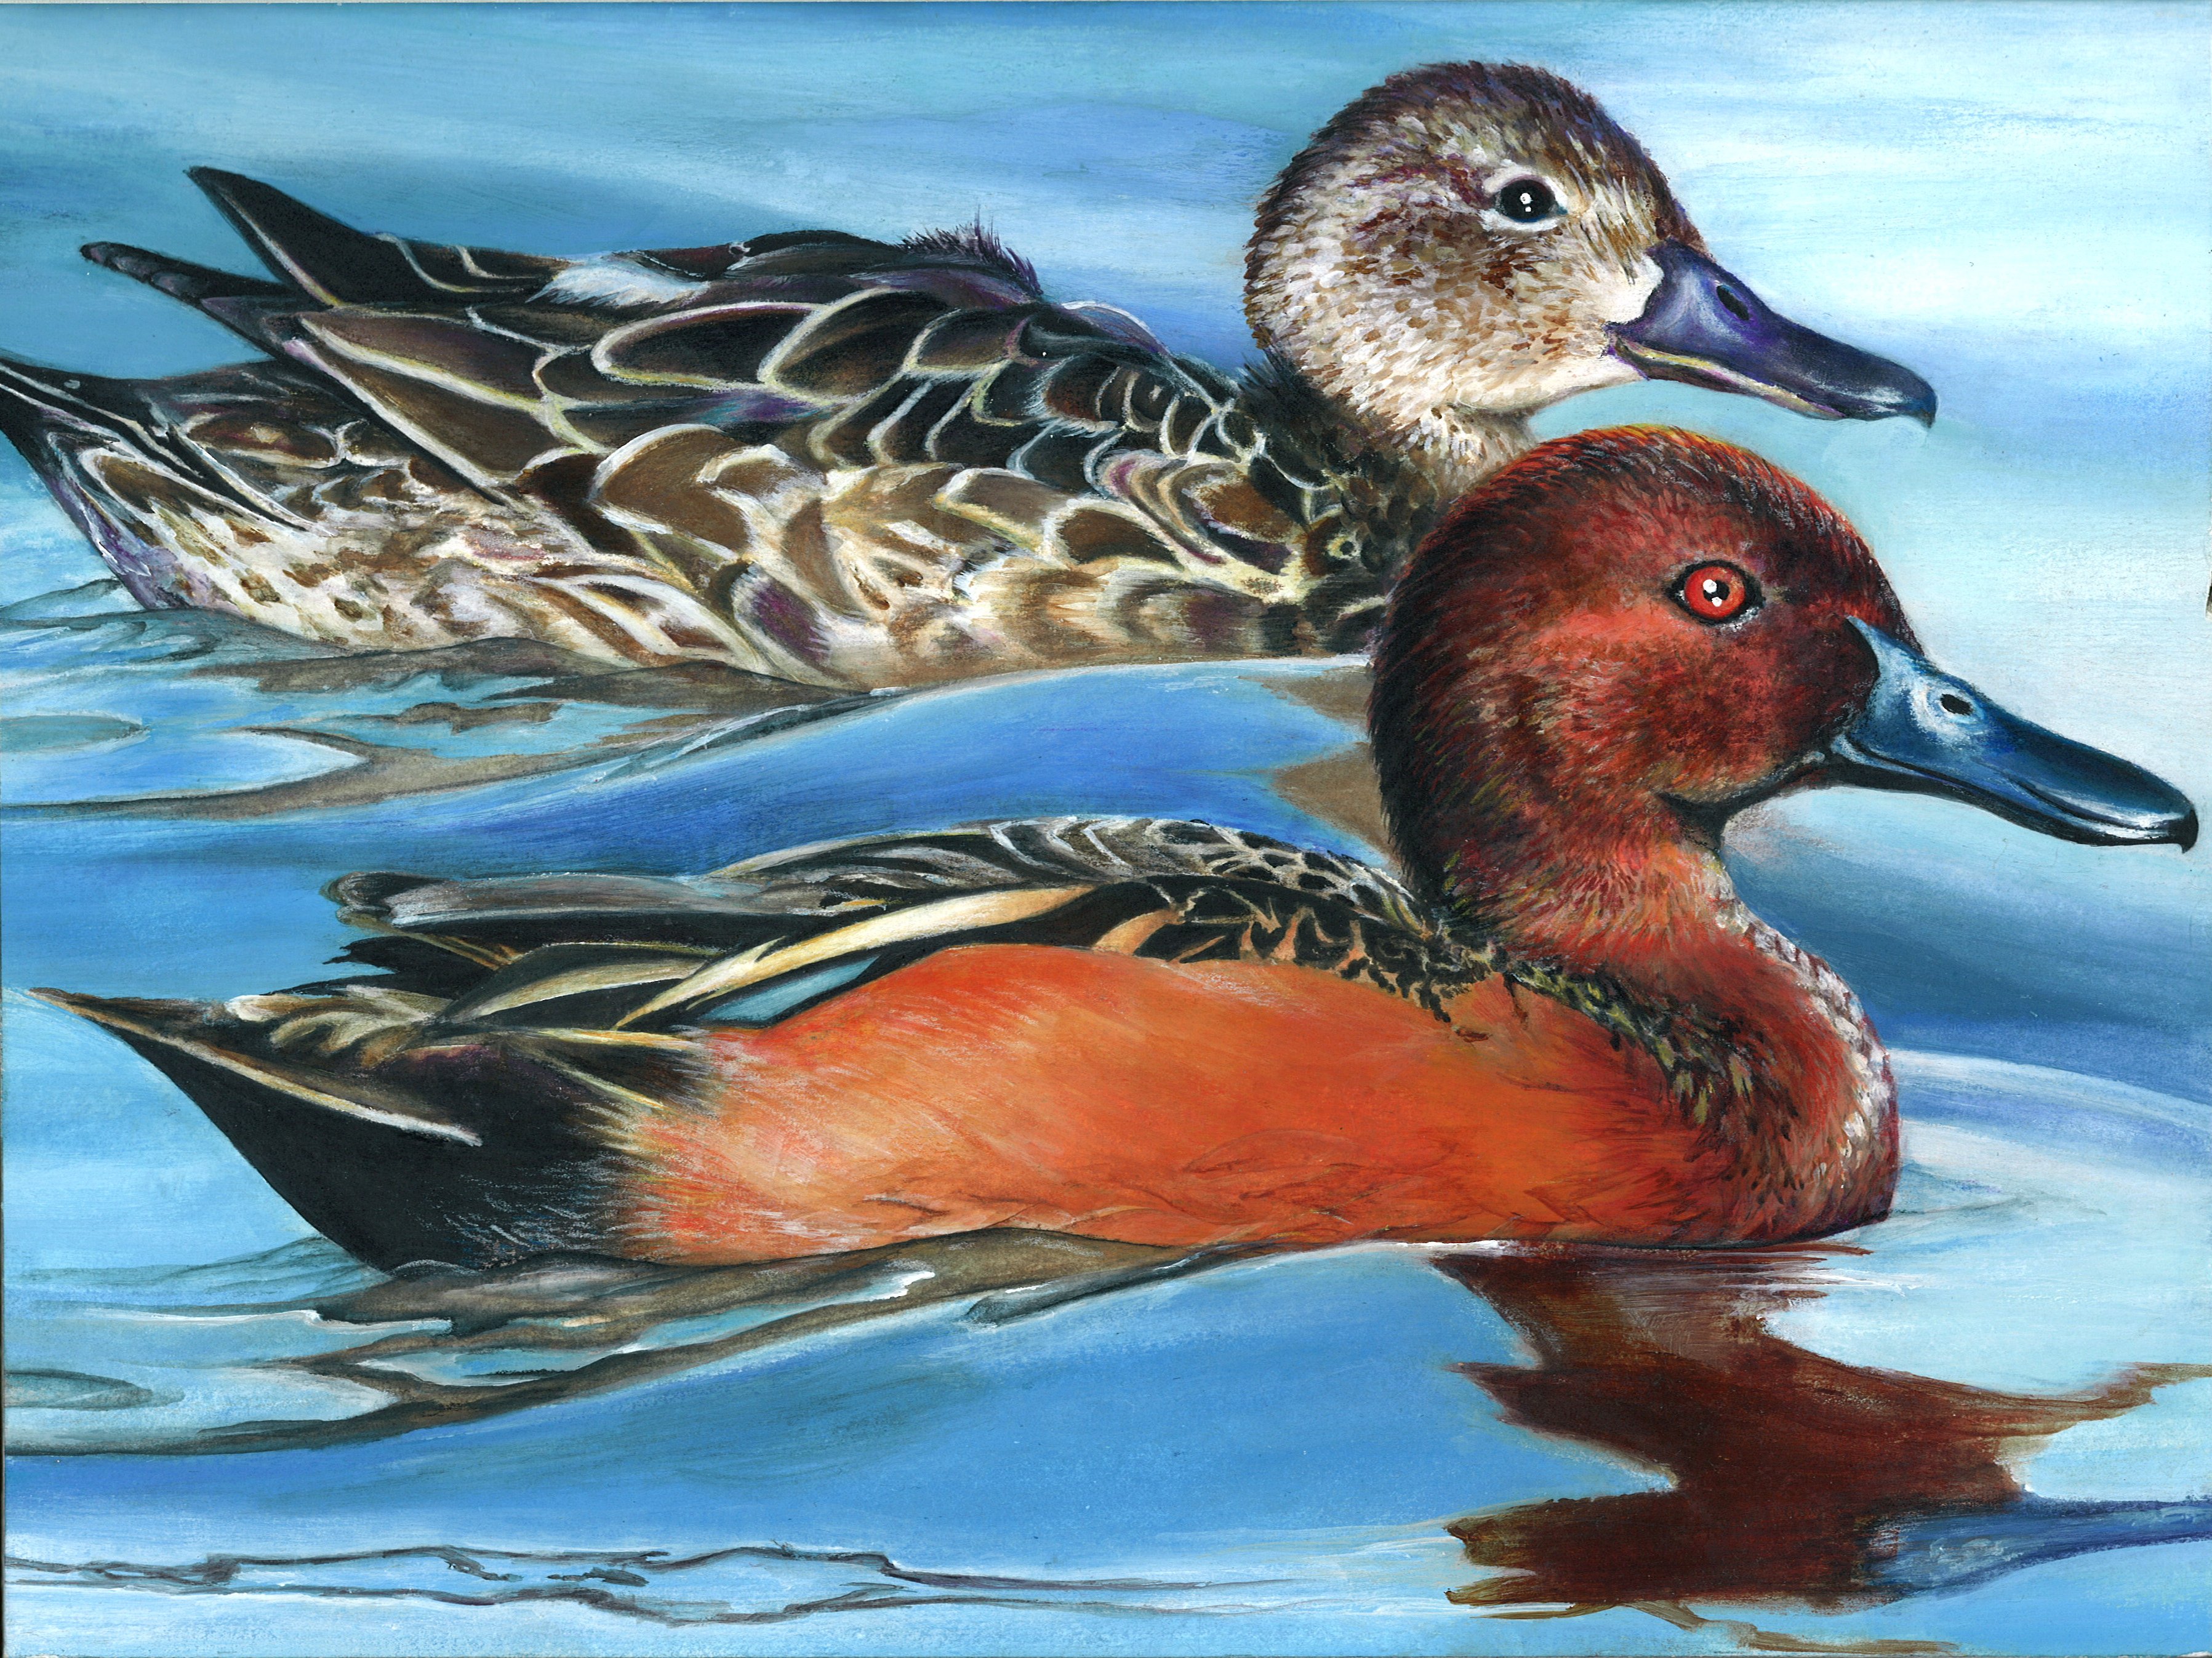 The finalist from Tennessee for the 2011 Junior Duck Stamp Art Contest. (5598462440)